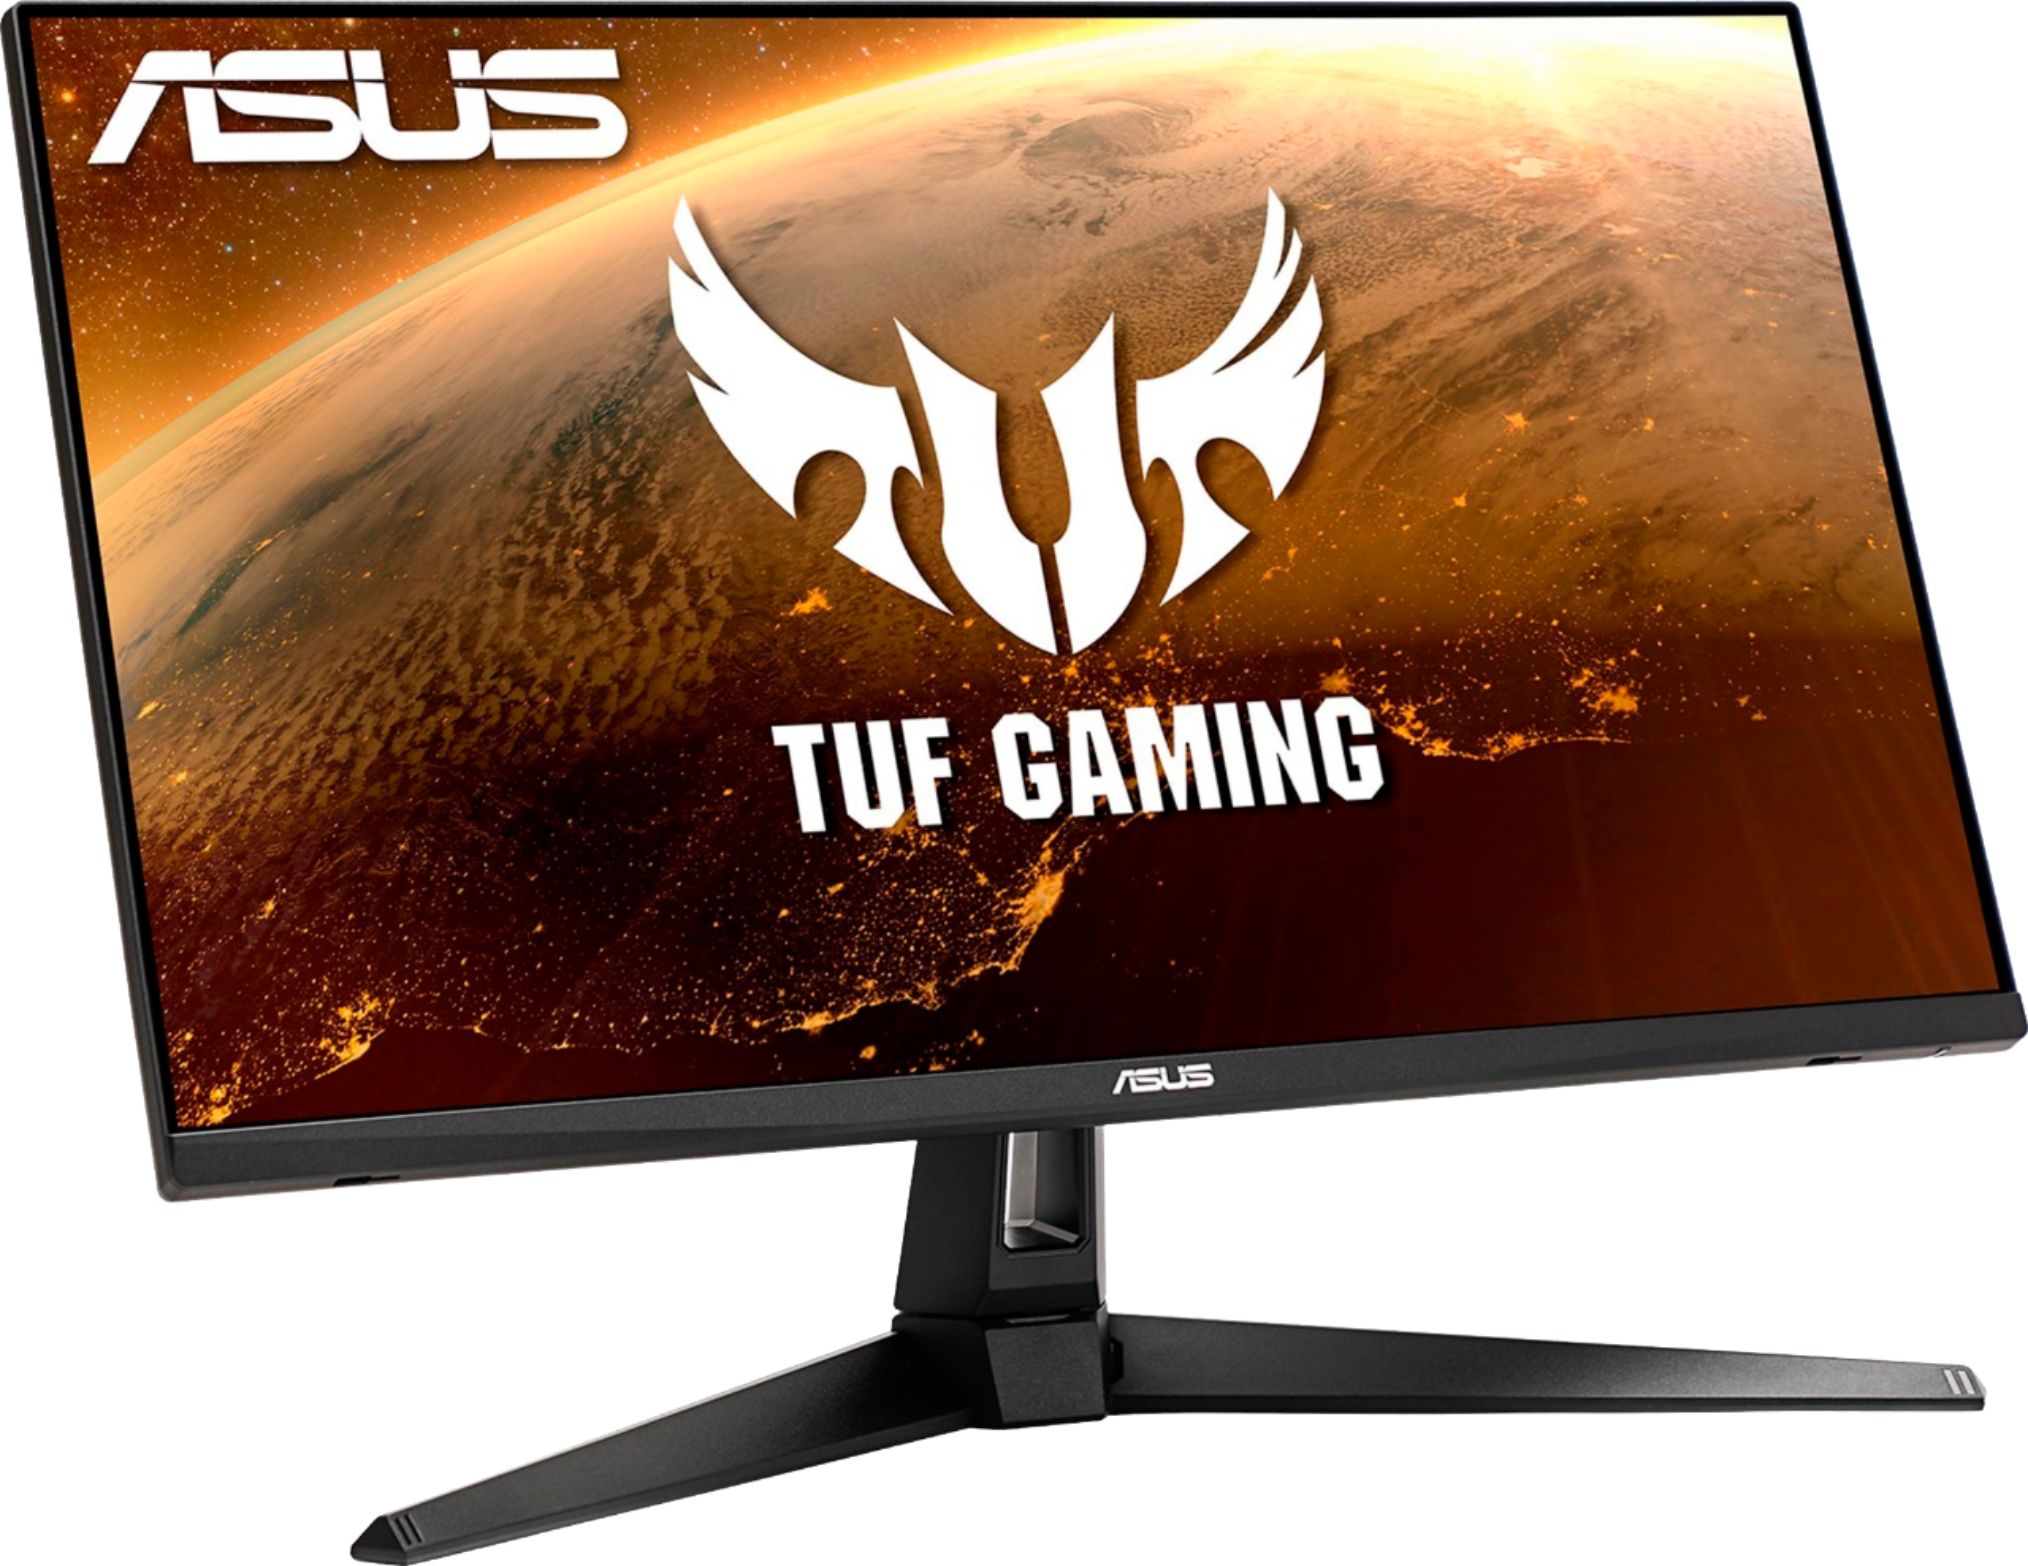 ASUS TUF Gaming 27” IPS QHD 170Hz 1ms G-SYNC Compatible Gaming Monitor with  HDR (DisplayPort,HDMI) Black VG27AQ1A - Best Buy